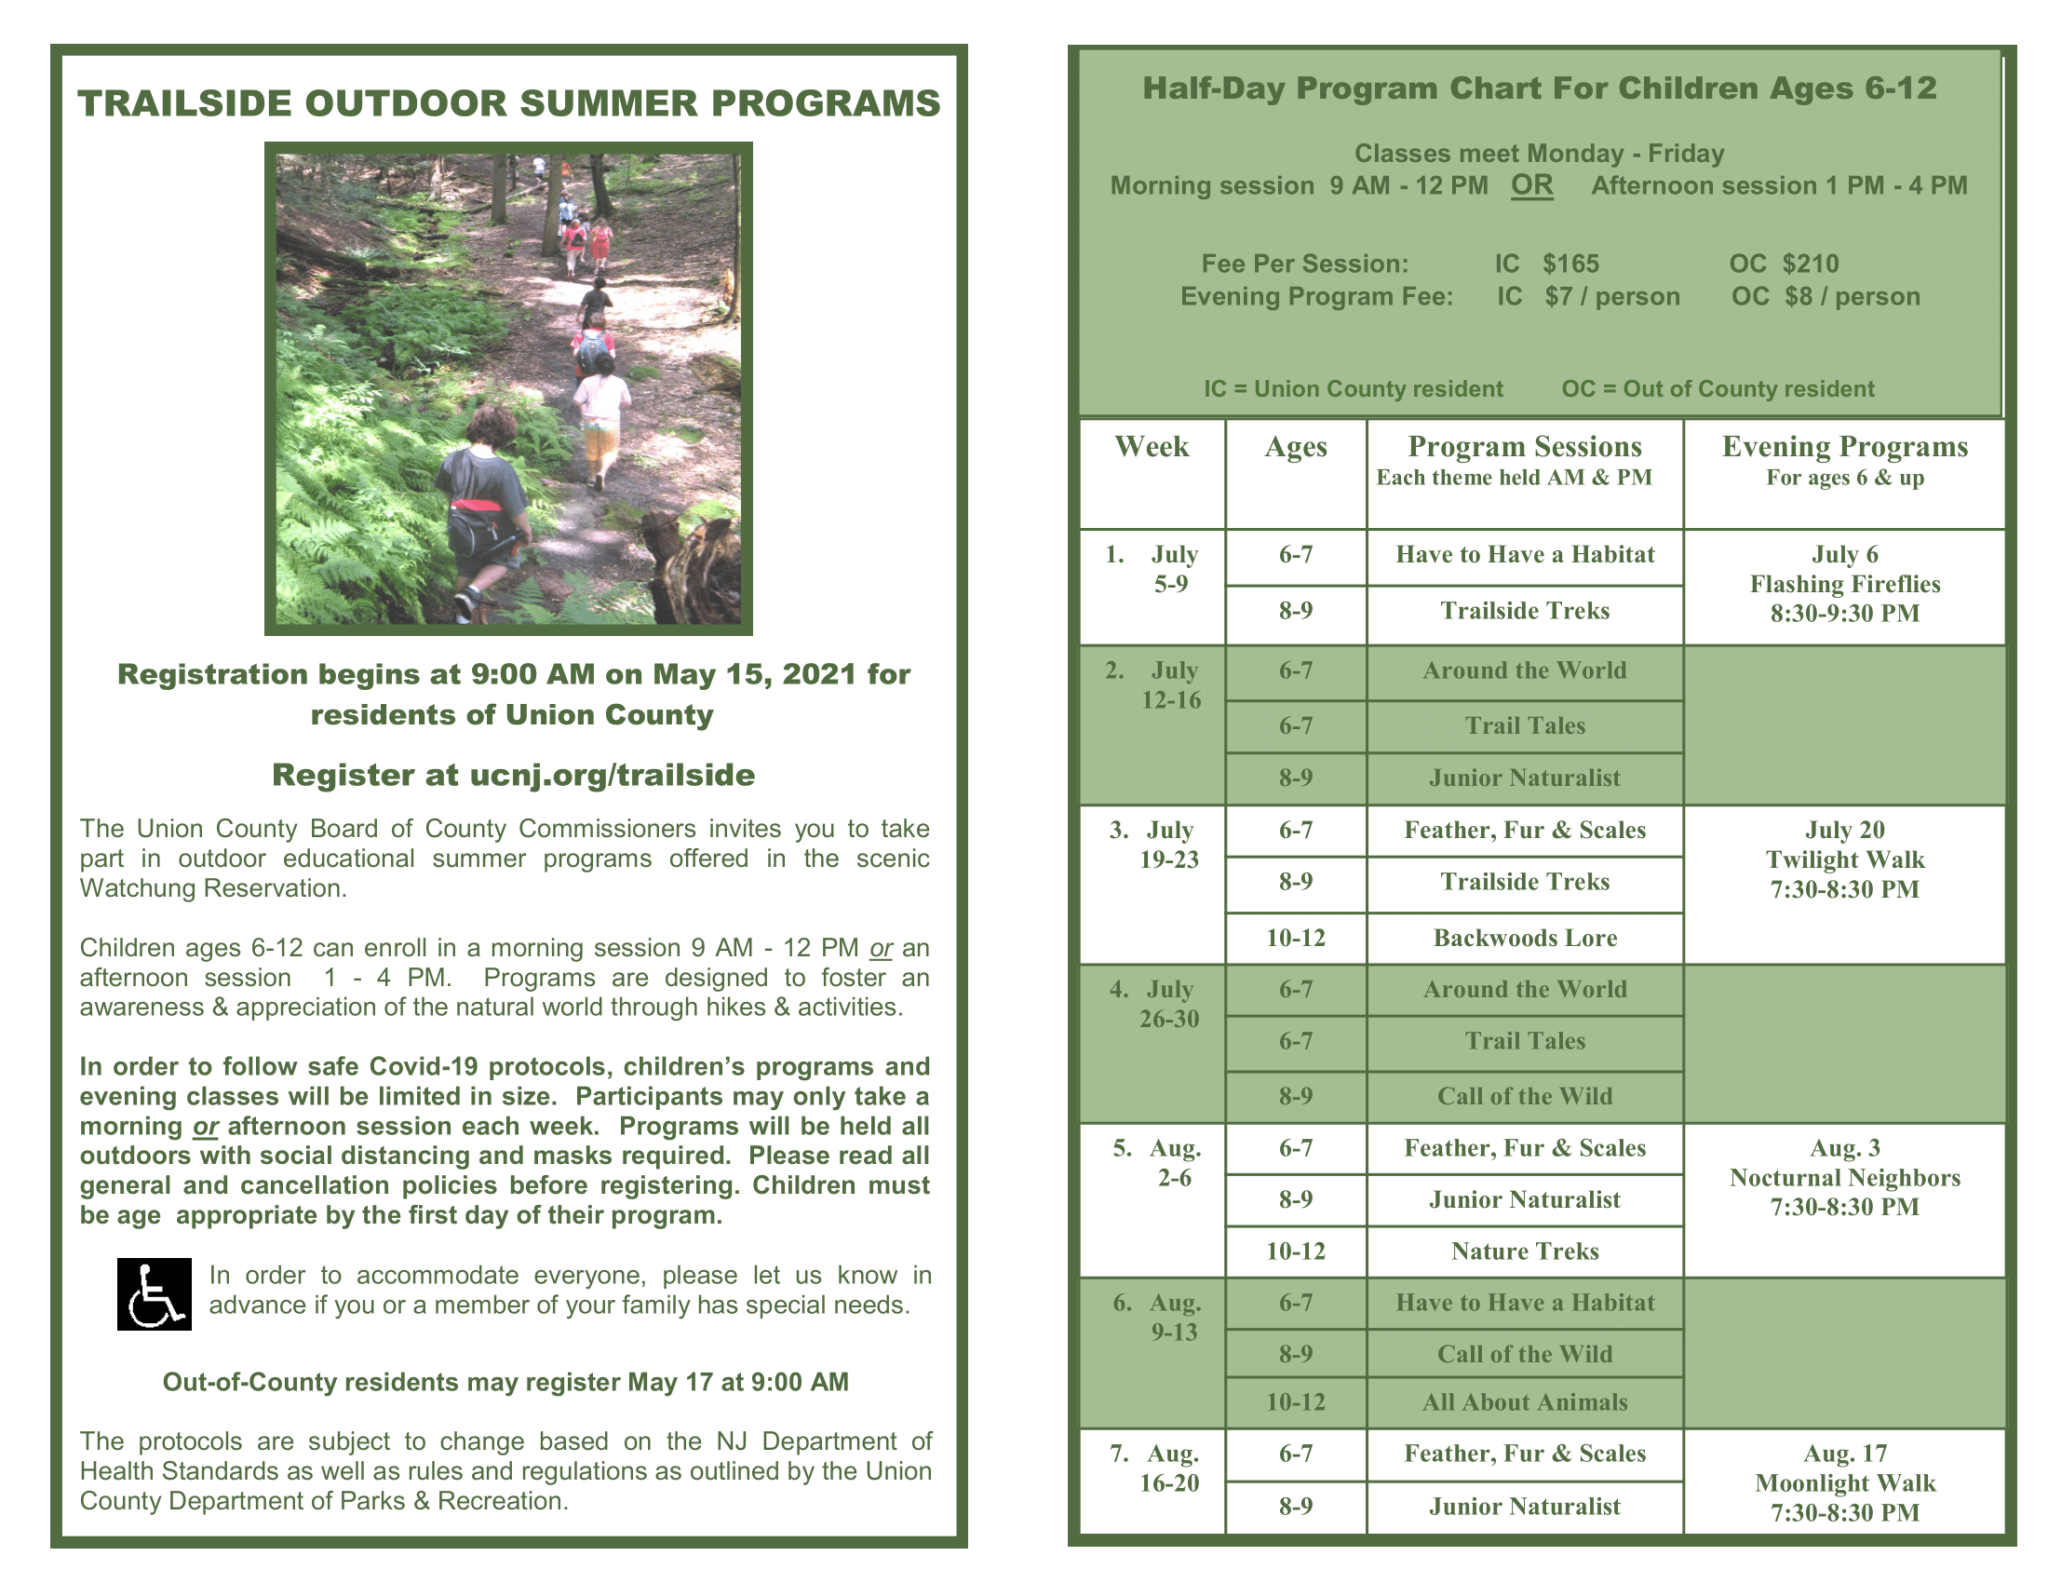 Register for Outdoor Summer Fun at Union County’s Trailside Nature and